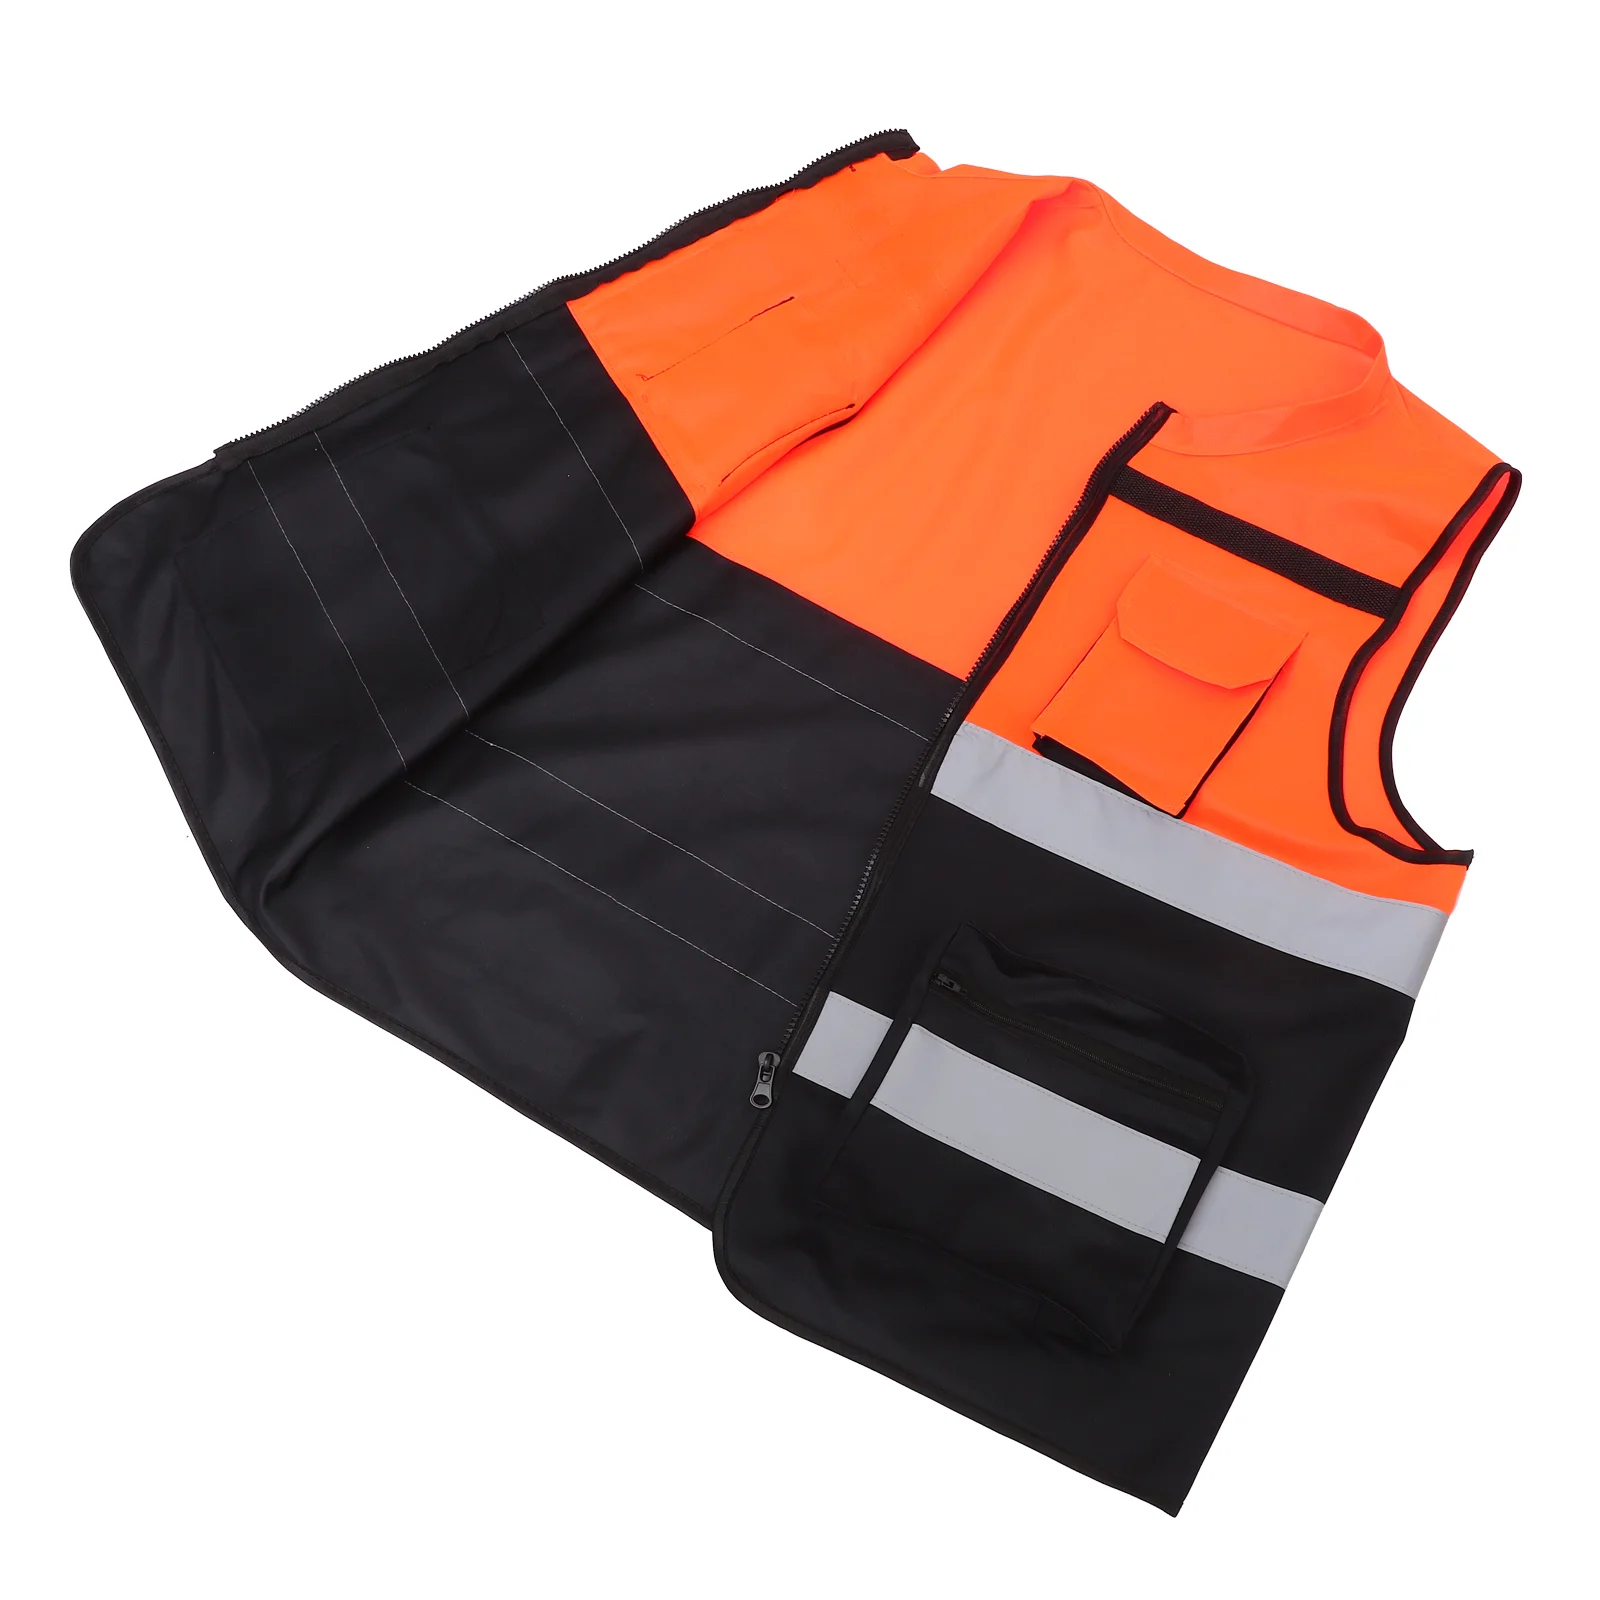 

While West Reflective Vest High Visibility Running at Night Security Safety for Men Women's